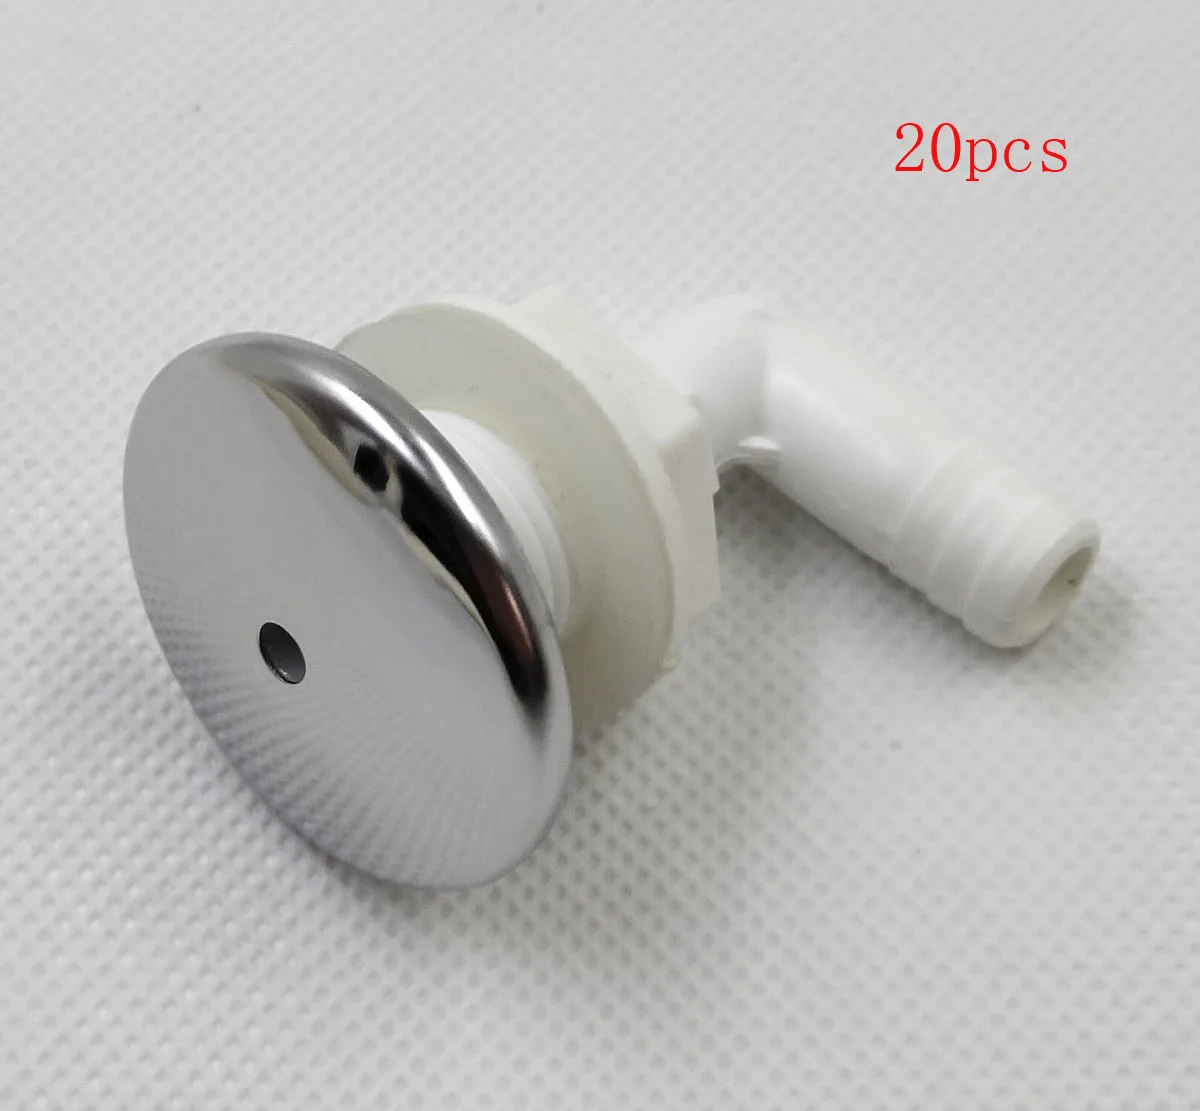 

20pcs/Very cheap bathtub spa stainless steel connecting air jet, hot tub blower nazzle 60-15